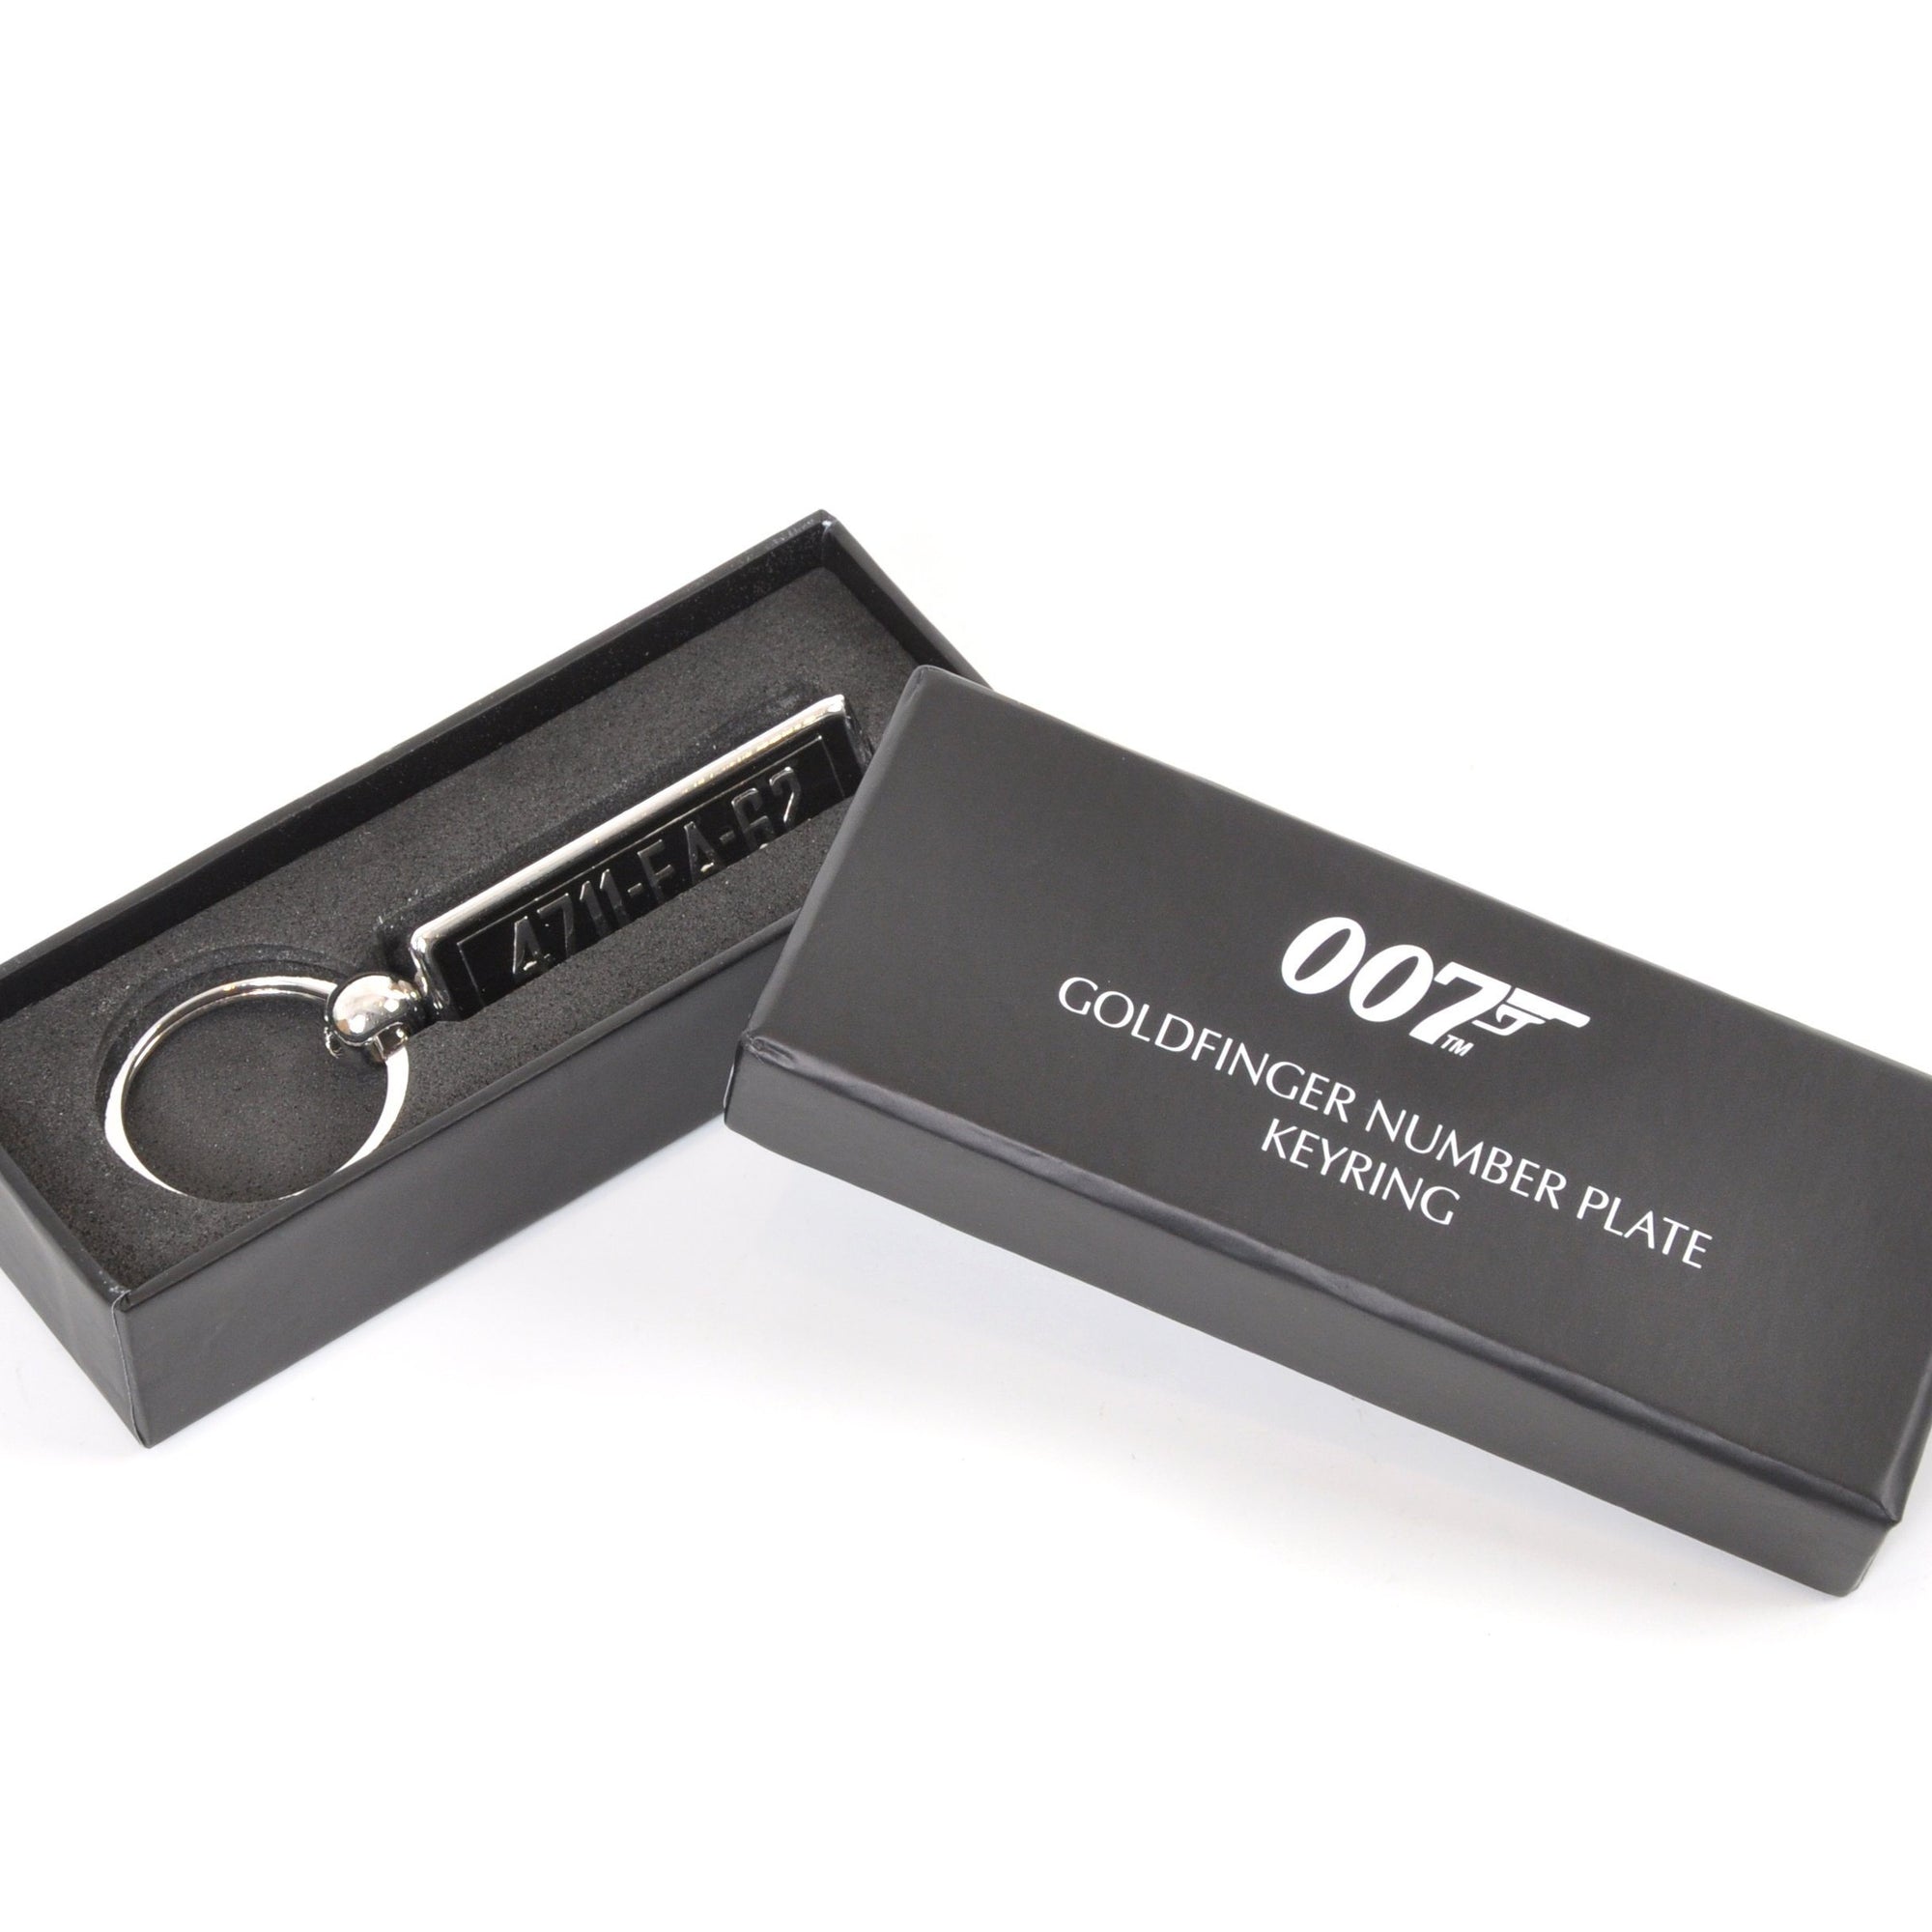 Aston Martin DB5 Number Plate Keyring - Goldfinger Edition - 007STORE